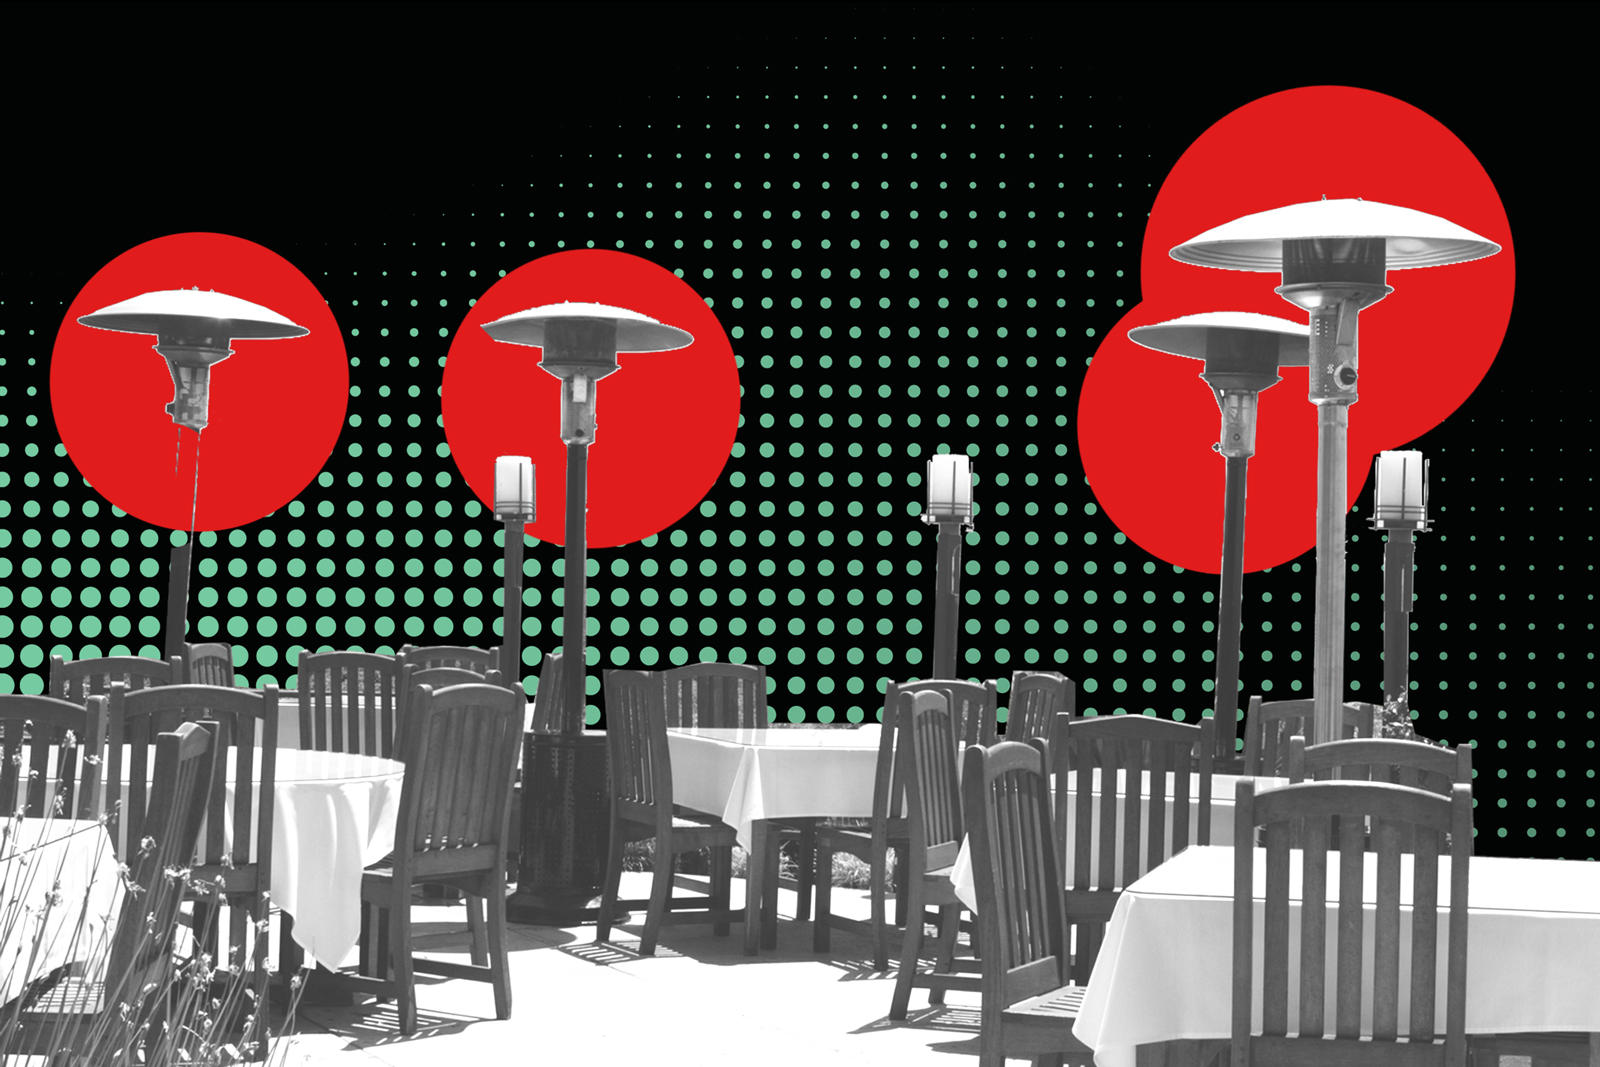 New York restaurateurs are having trouble finding heat lamps to make outdoor dining sustainable in colder months. (iStock)